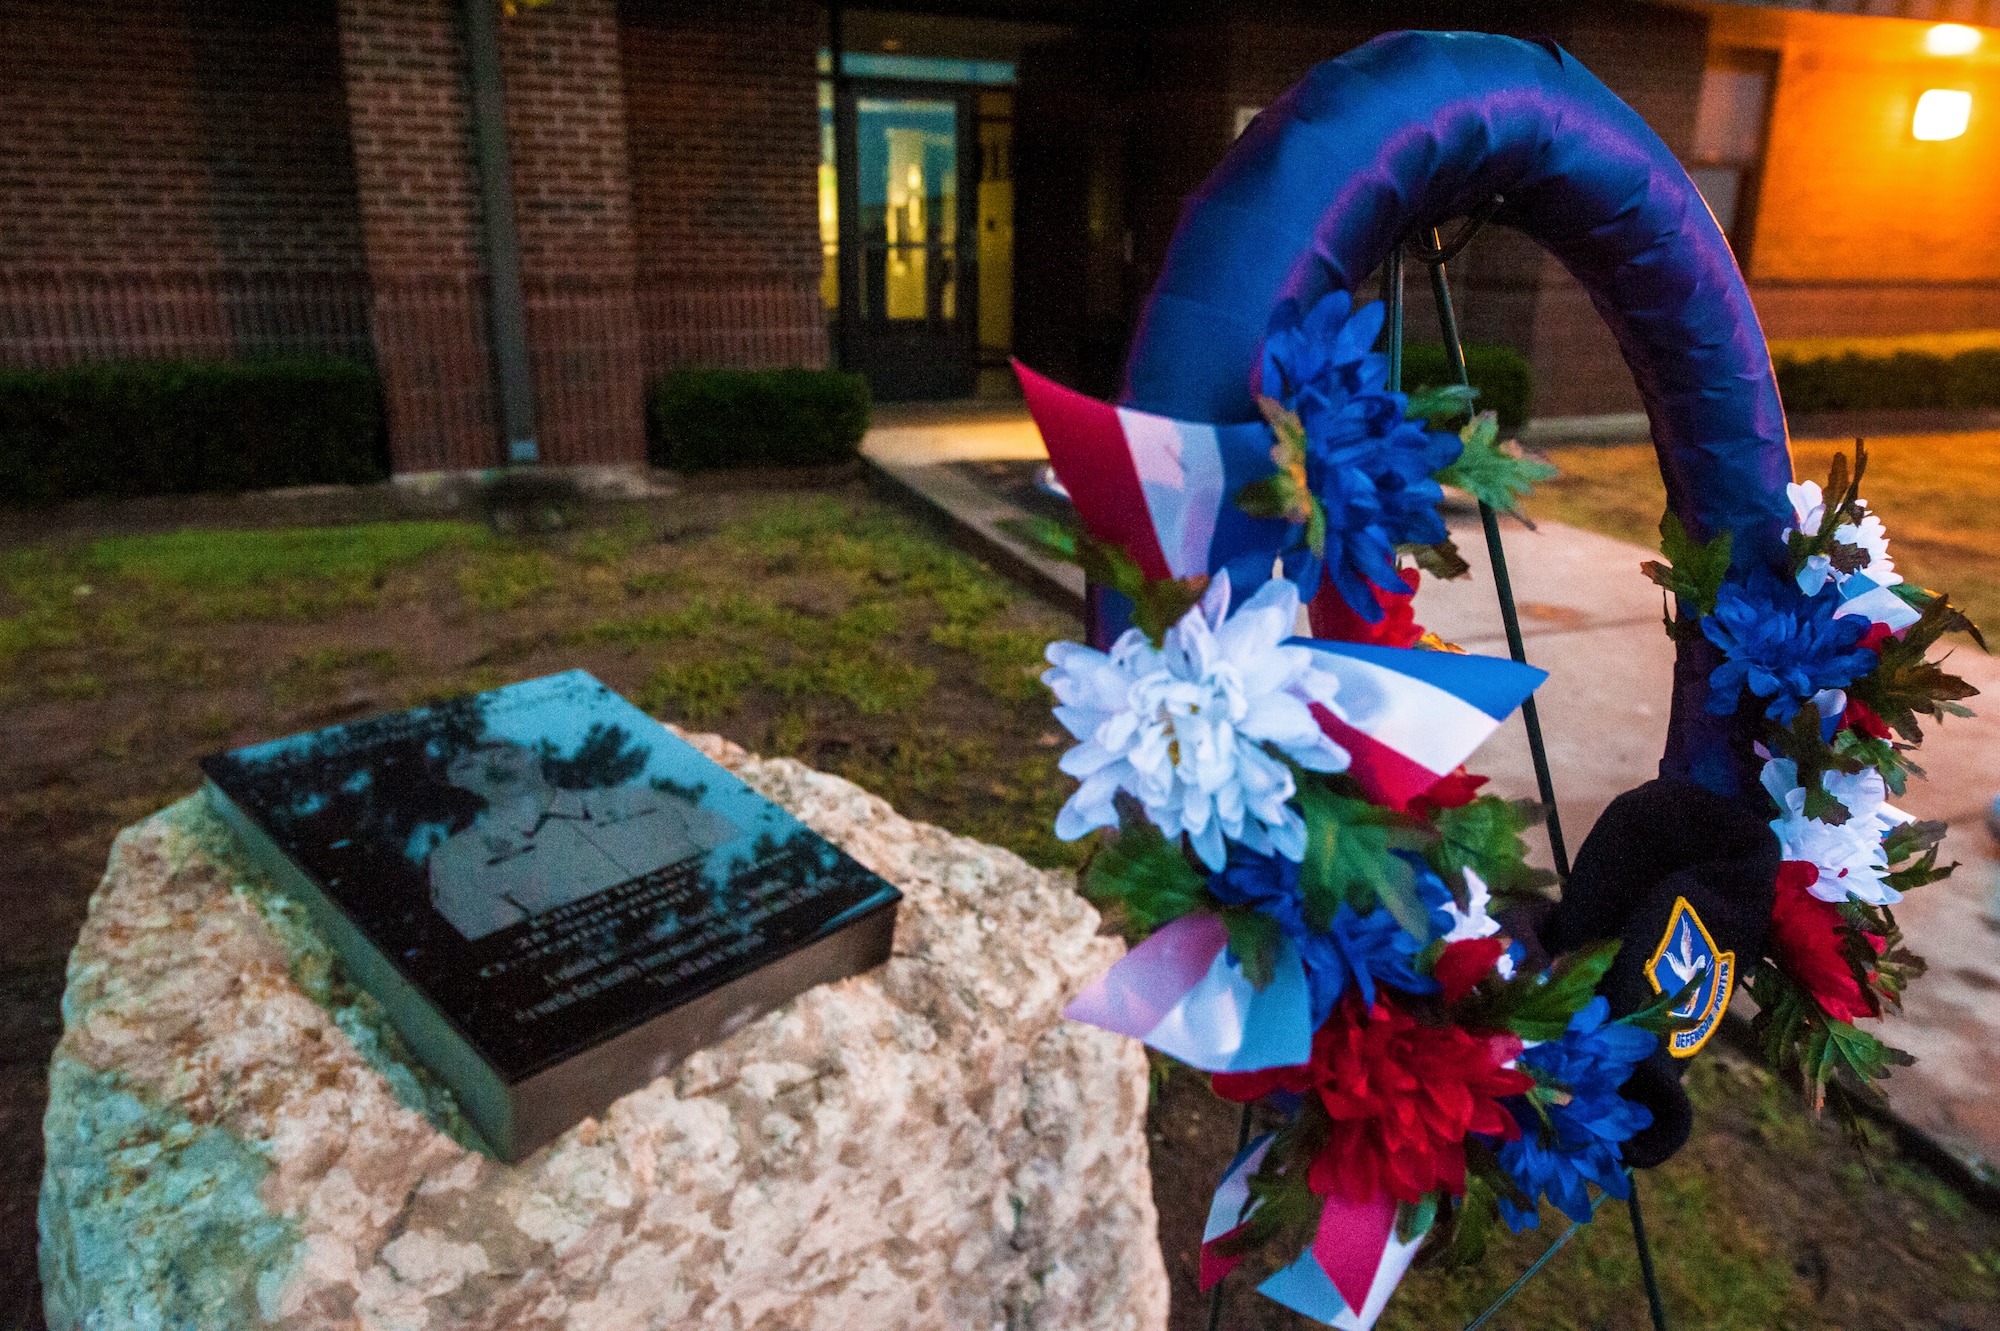 GOODFELLOW AIR FORCE BASE, Texas – A wreath is laid in front of Airman 1st Class Elizabeth Jacobson’s Memorial to commemorate her sacrifice Sept. 28, 2012. This year marks the seventh anniversary of her death. Jacobson was the first security forces member as well as the first Air Force female to be killed in action in Operation Iraqi Freedom in 2005 by a roadside bomb. (U.S. Air Force photo/Airman 1st Class Michael Smith)